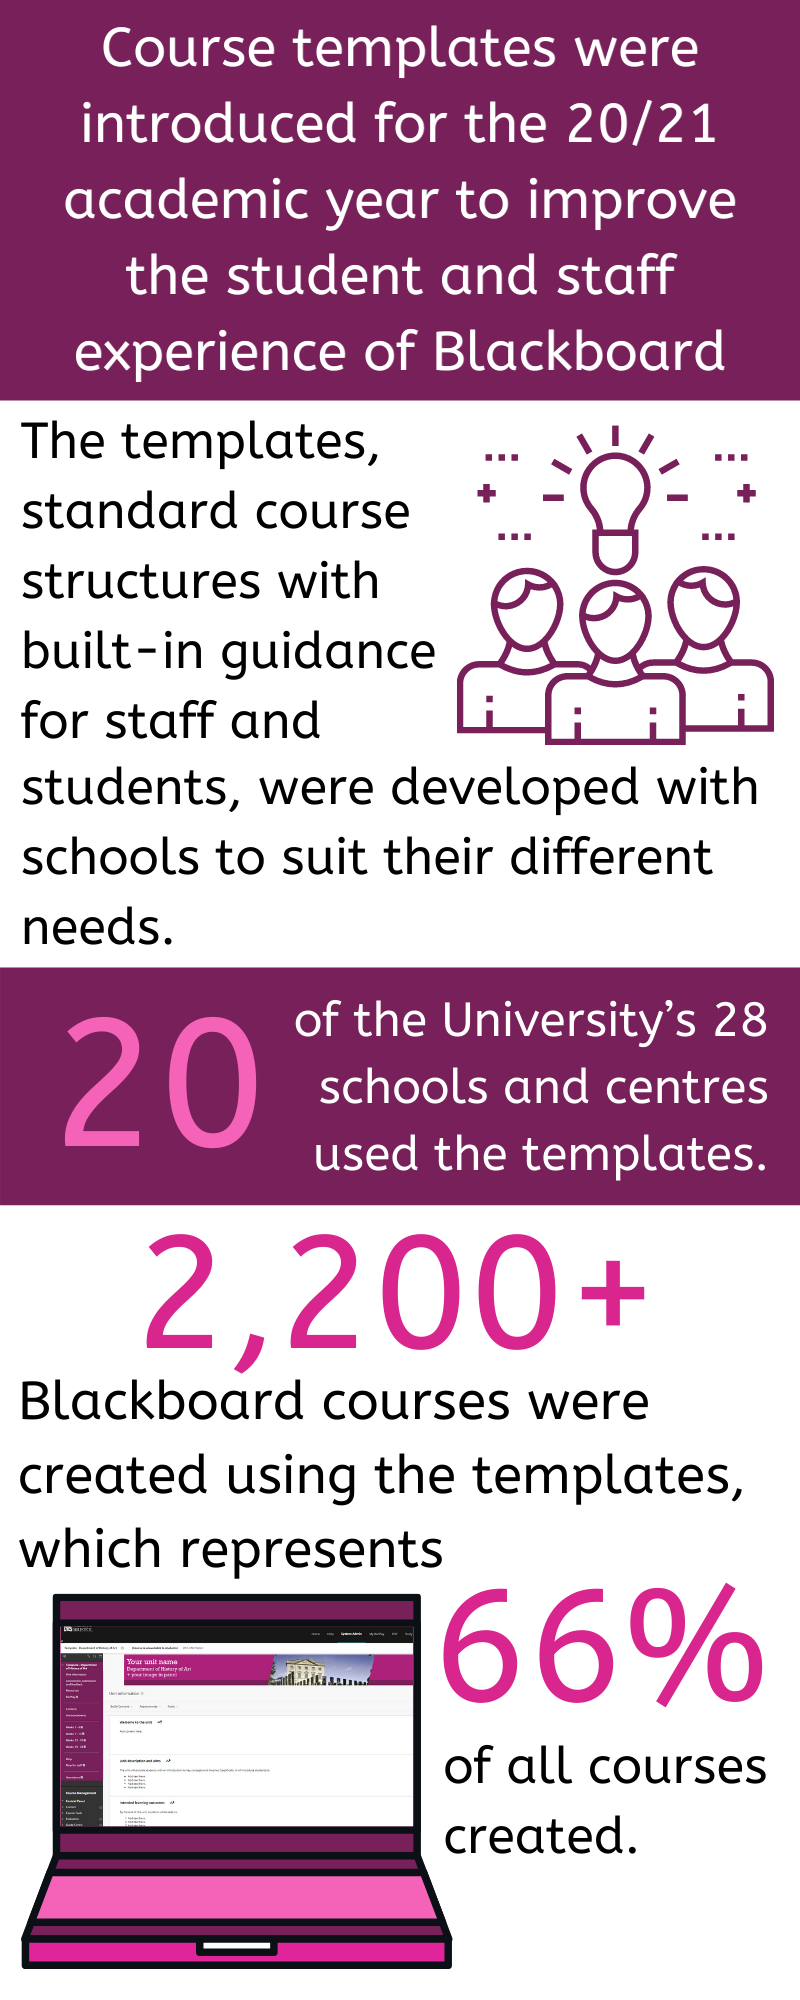 Course templates were introduced for the 20/21 academic year to improve the student and staff experience of Blackboard. The templates were developed in consultation with Schools, tailored to their differing needs. 20 of the University’s 28 Schools and Centres used the templates. 2,200+ Blackboard courses were created using the templates, which represents 66% of all courses created.